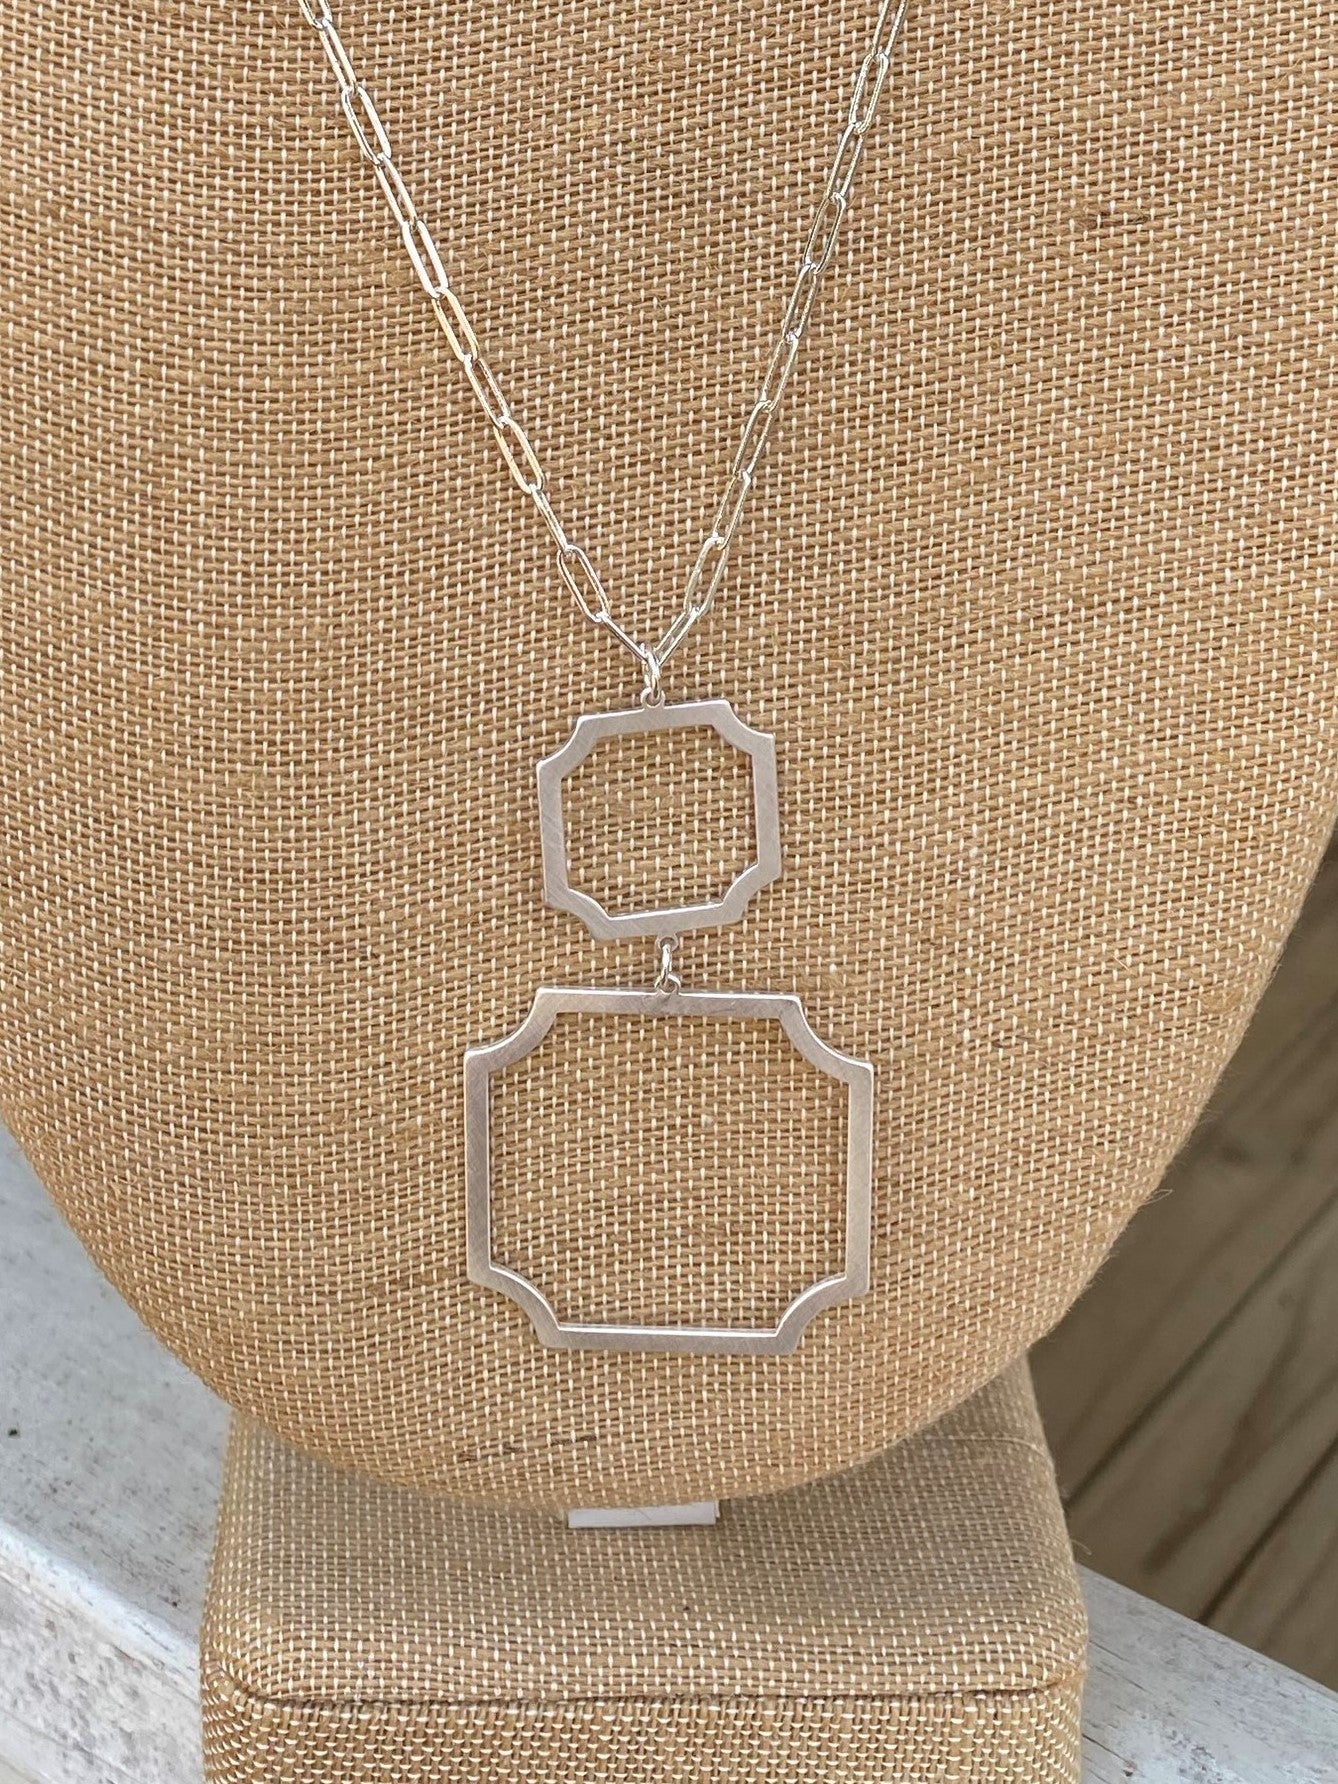 This stunning 35-38" necklace will add a luxurious touch to any outfit. Featuring a silver chain link chain, it is finished with a double drop in unique geometric shapes for a timeless and sophisticated look.